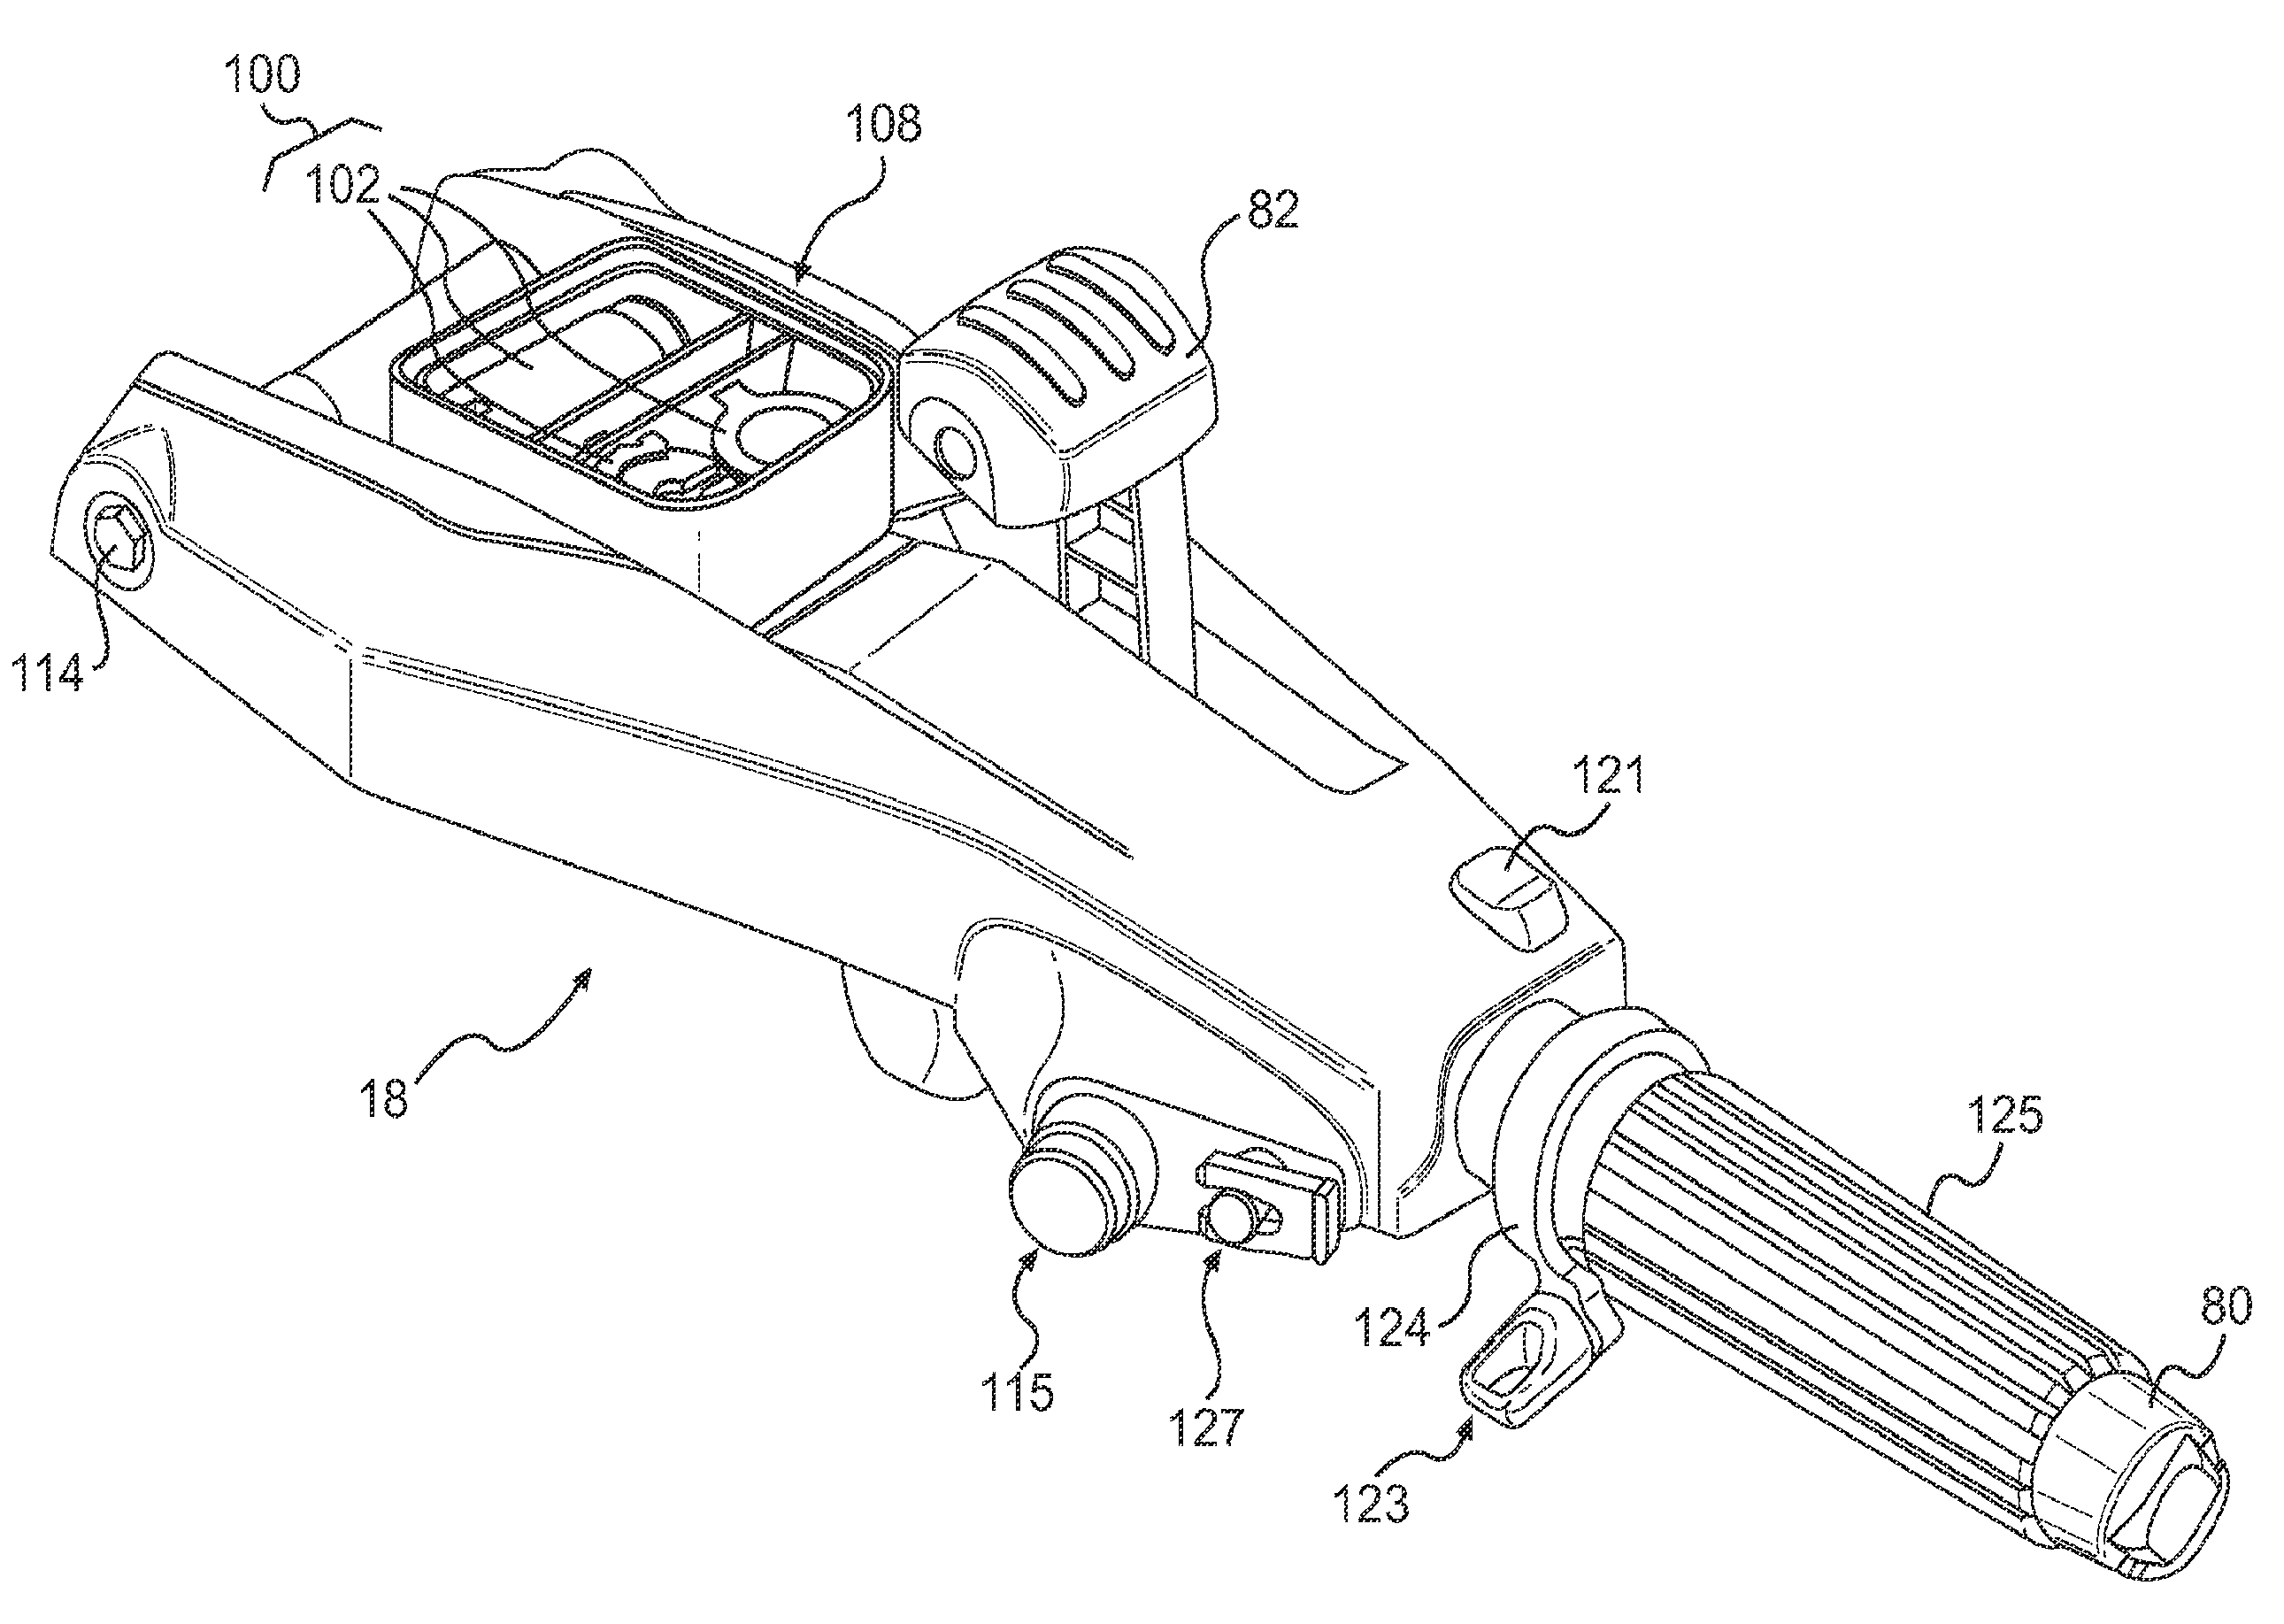 Engine starting system for a marine outboard engine